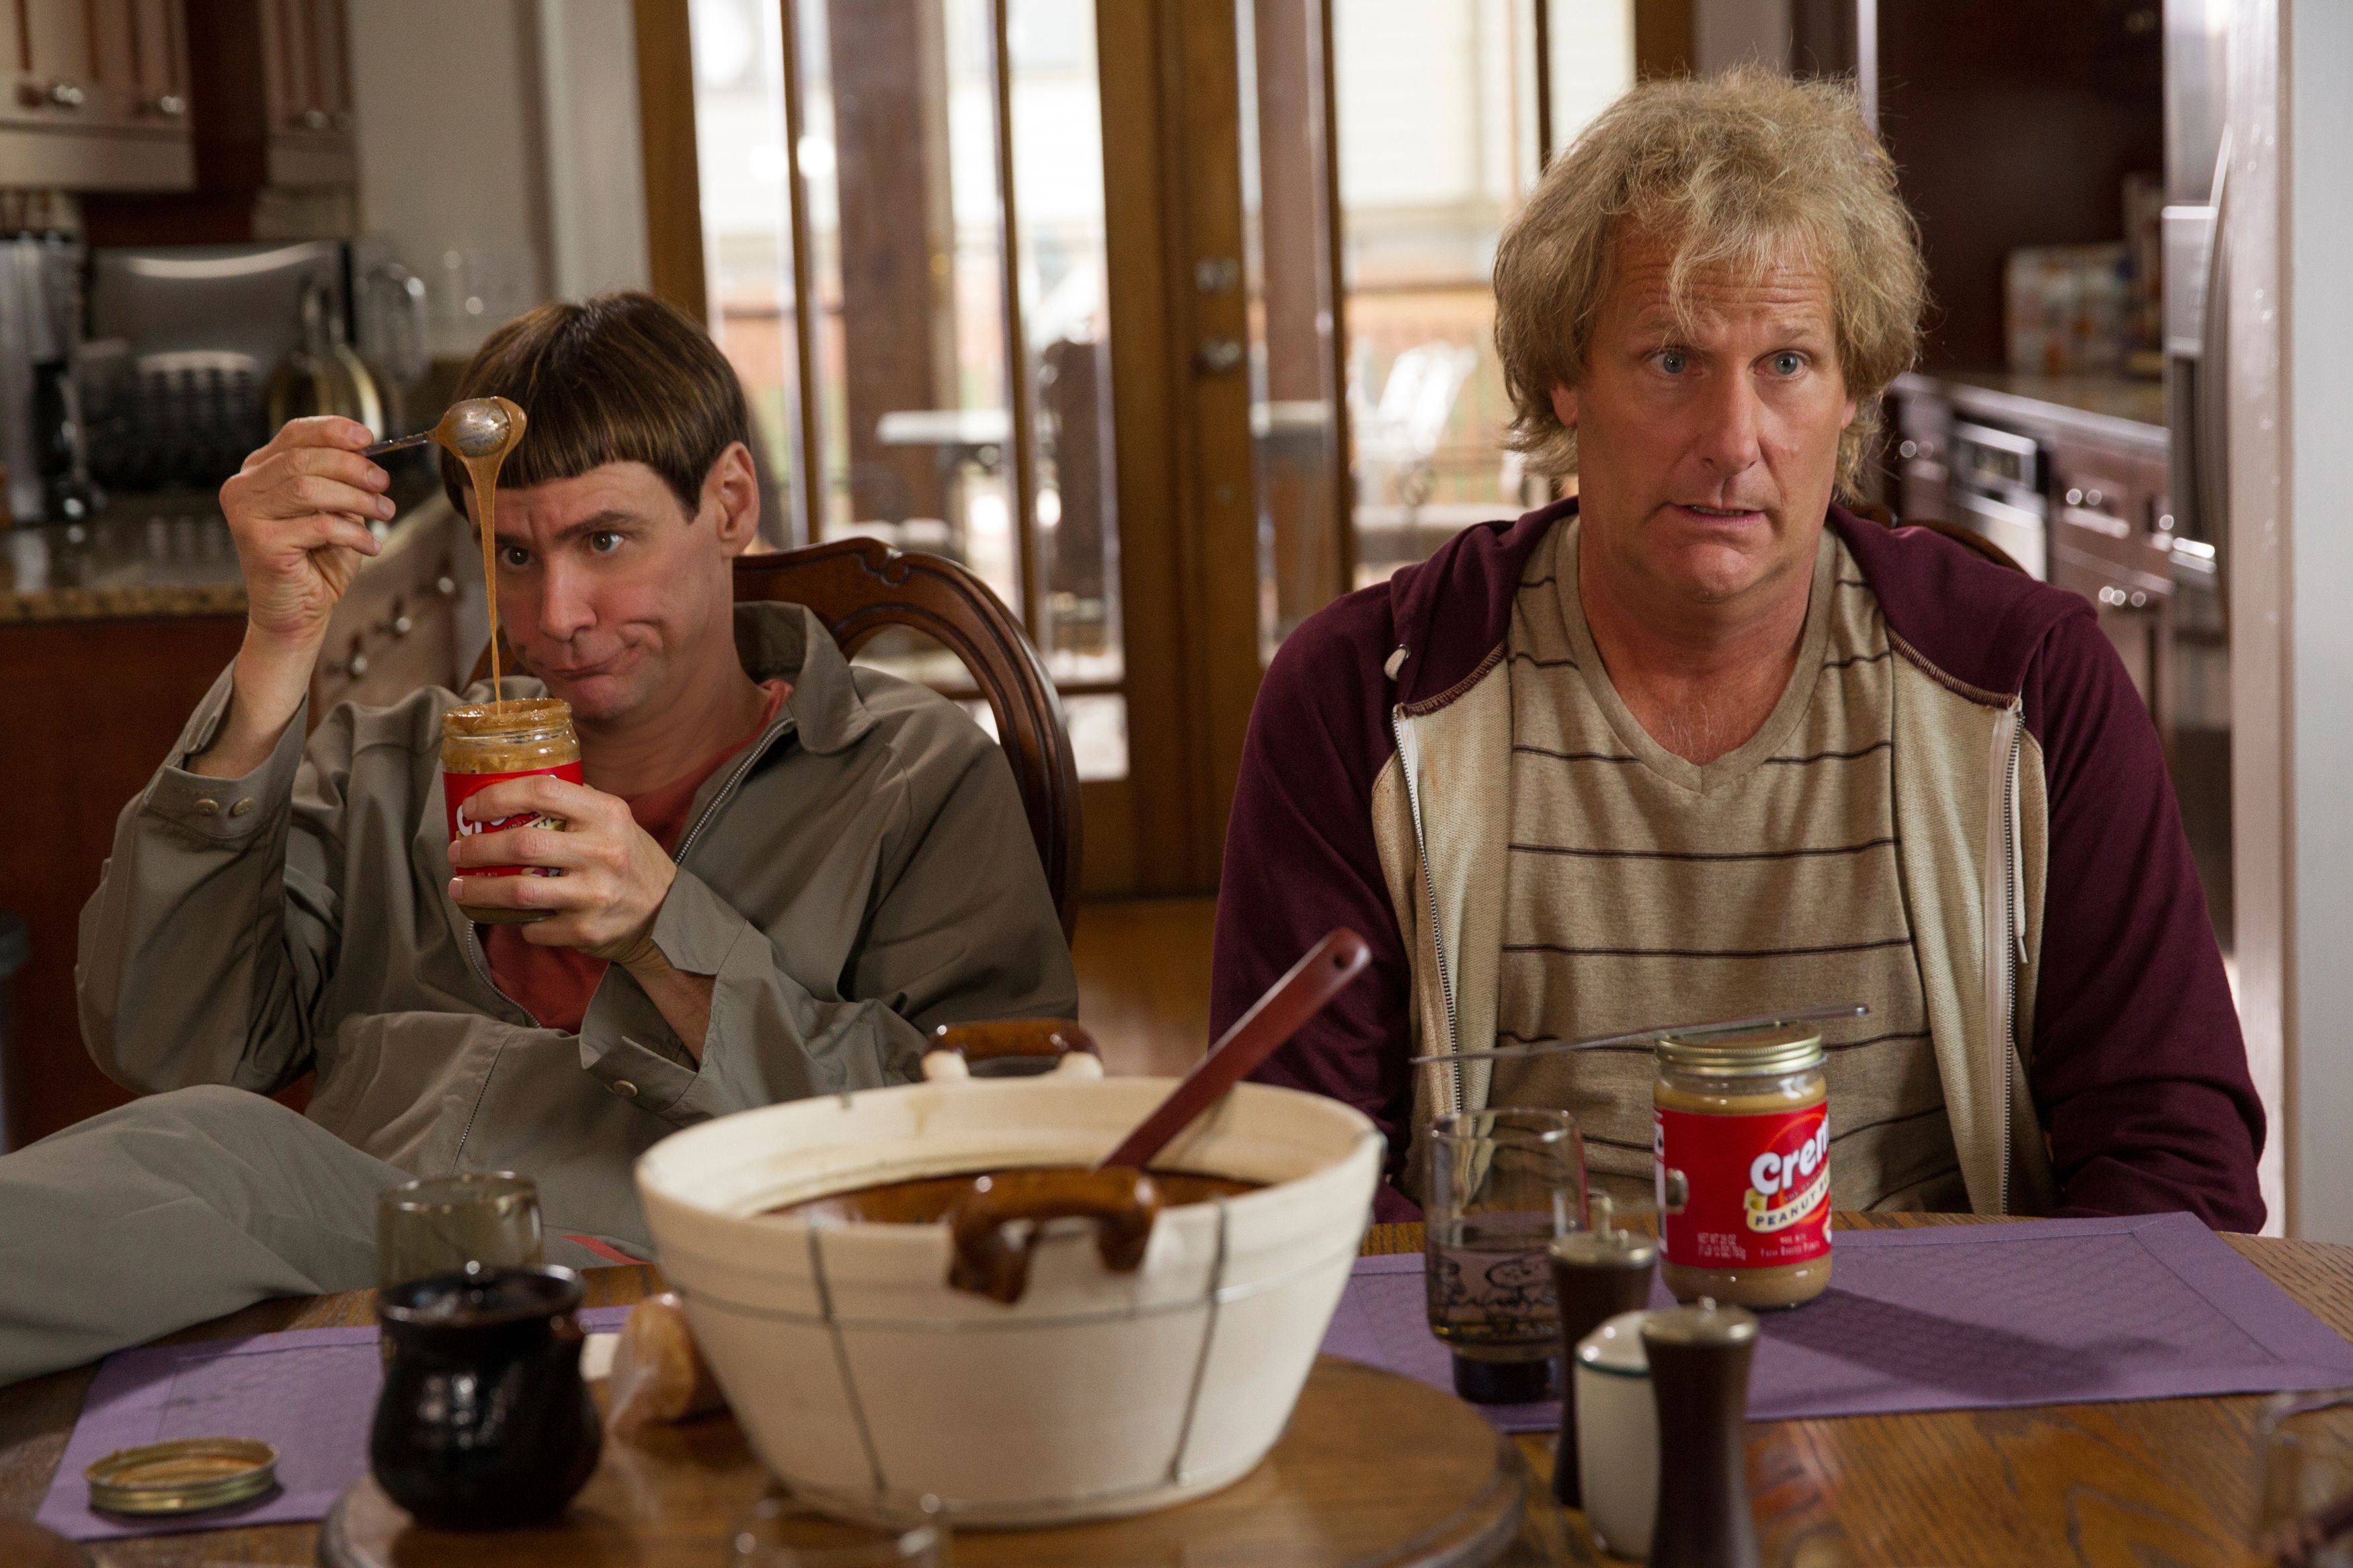 Dumb and Dumber To Clips and Images: Jim Carrey and Jeff Daniels Return